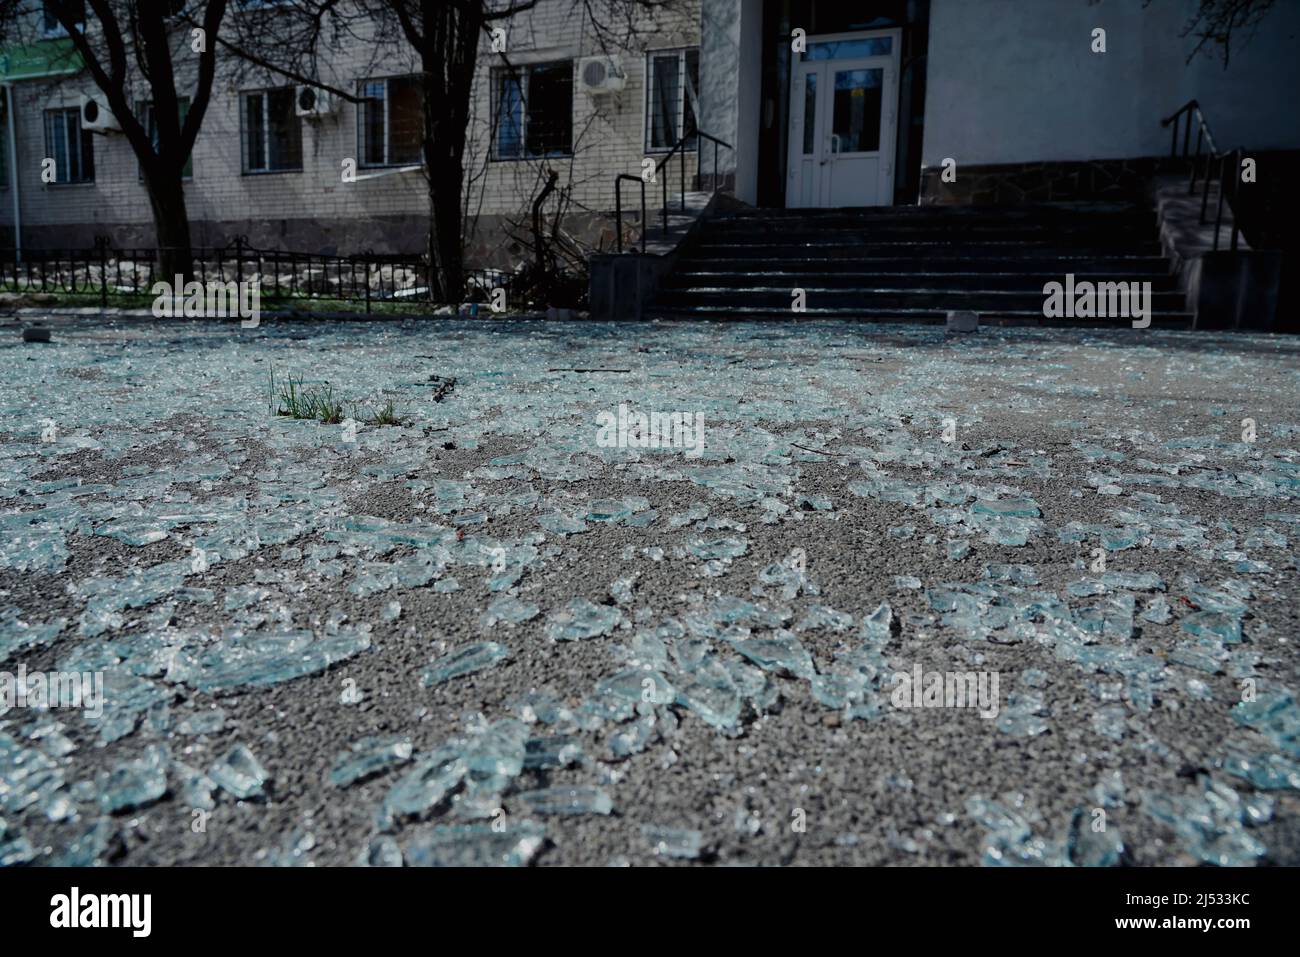 Pieces of broken glass lie on the pavement after the explosion Stock Photo